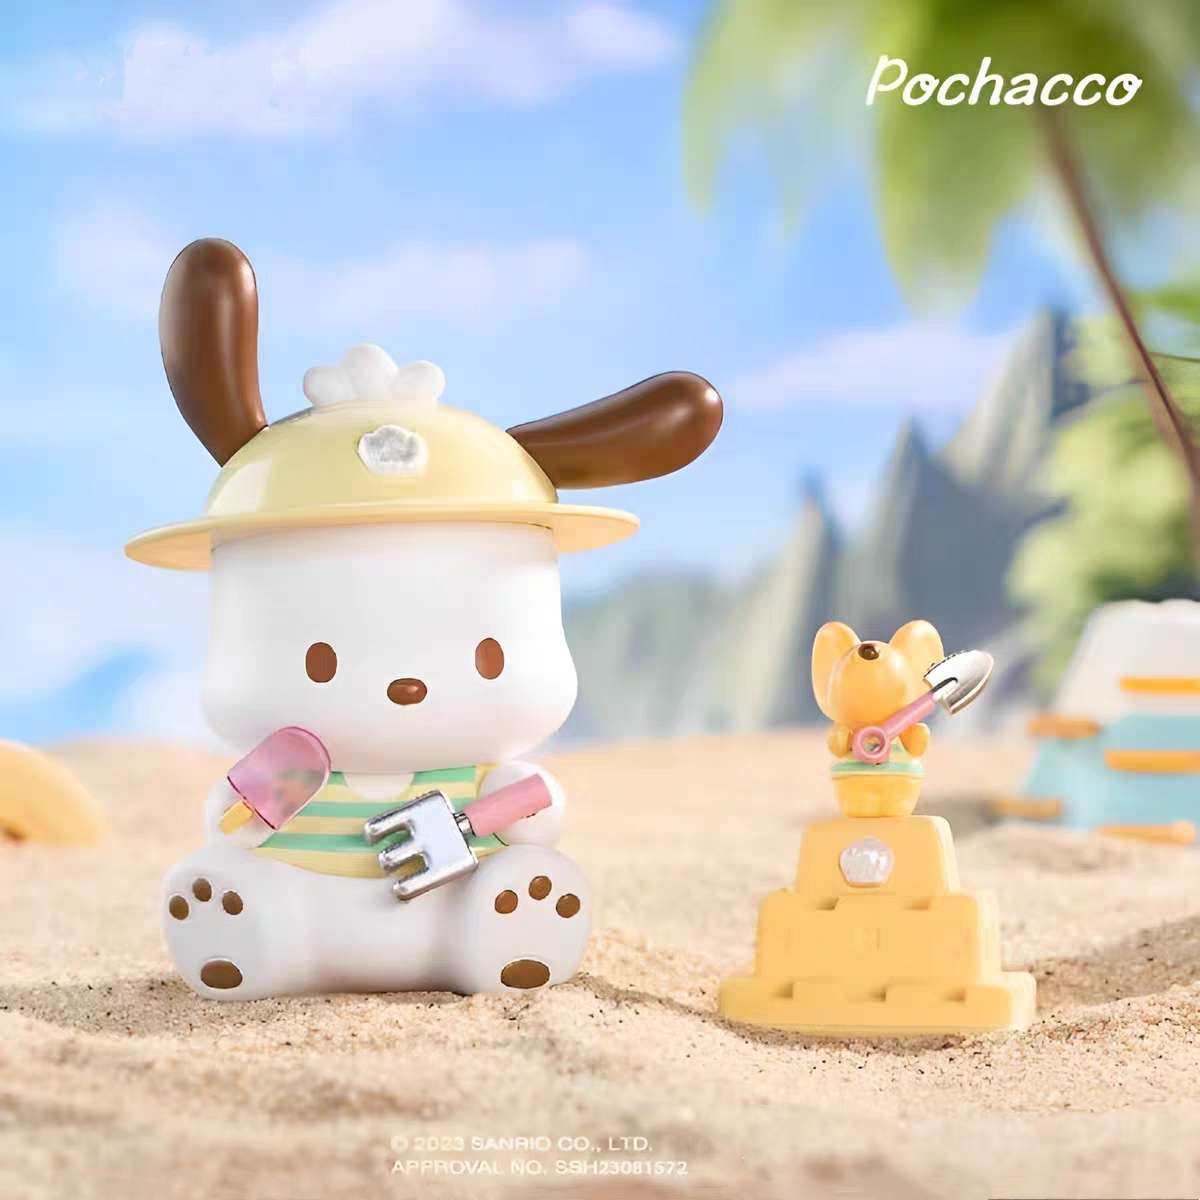 pochacco playing sand toy figure